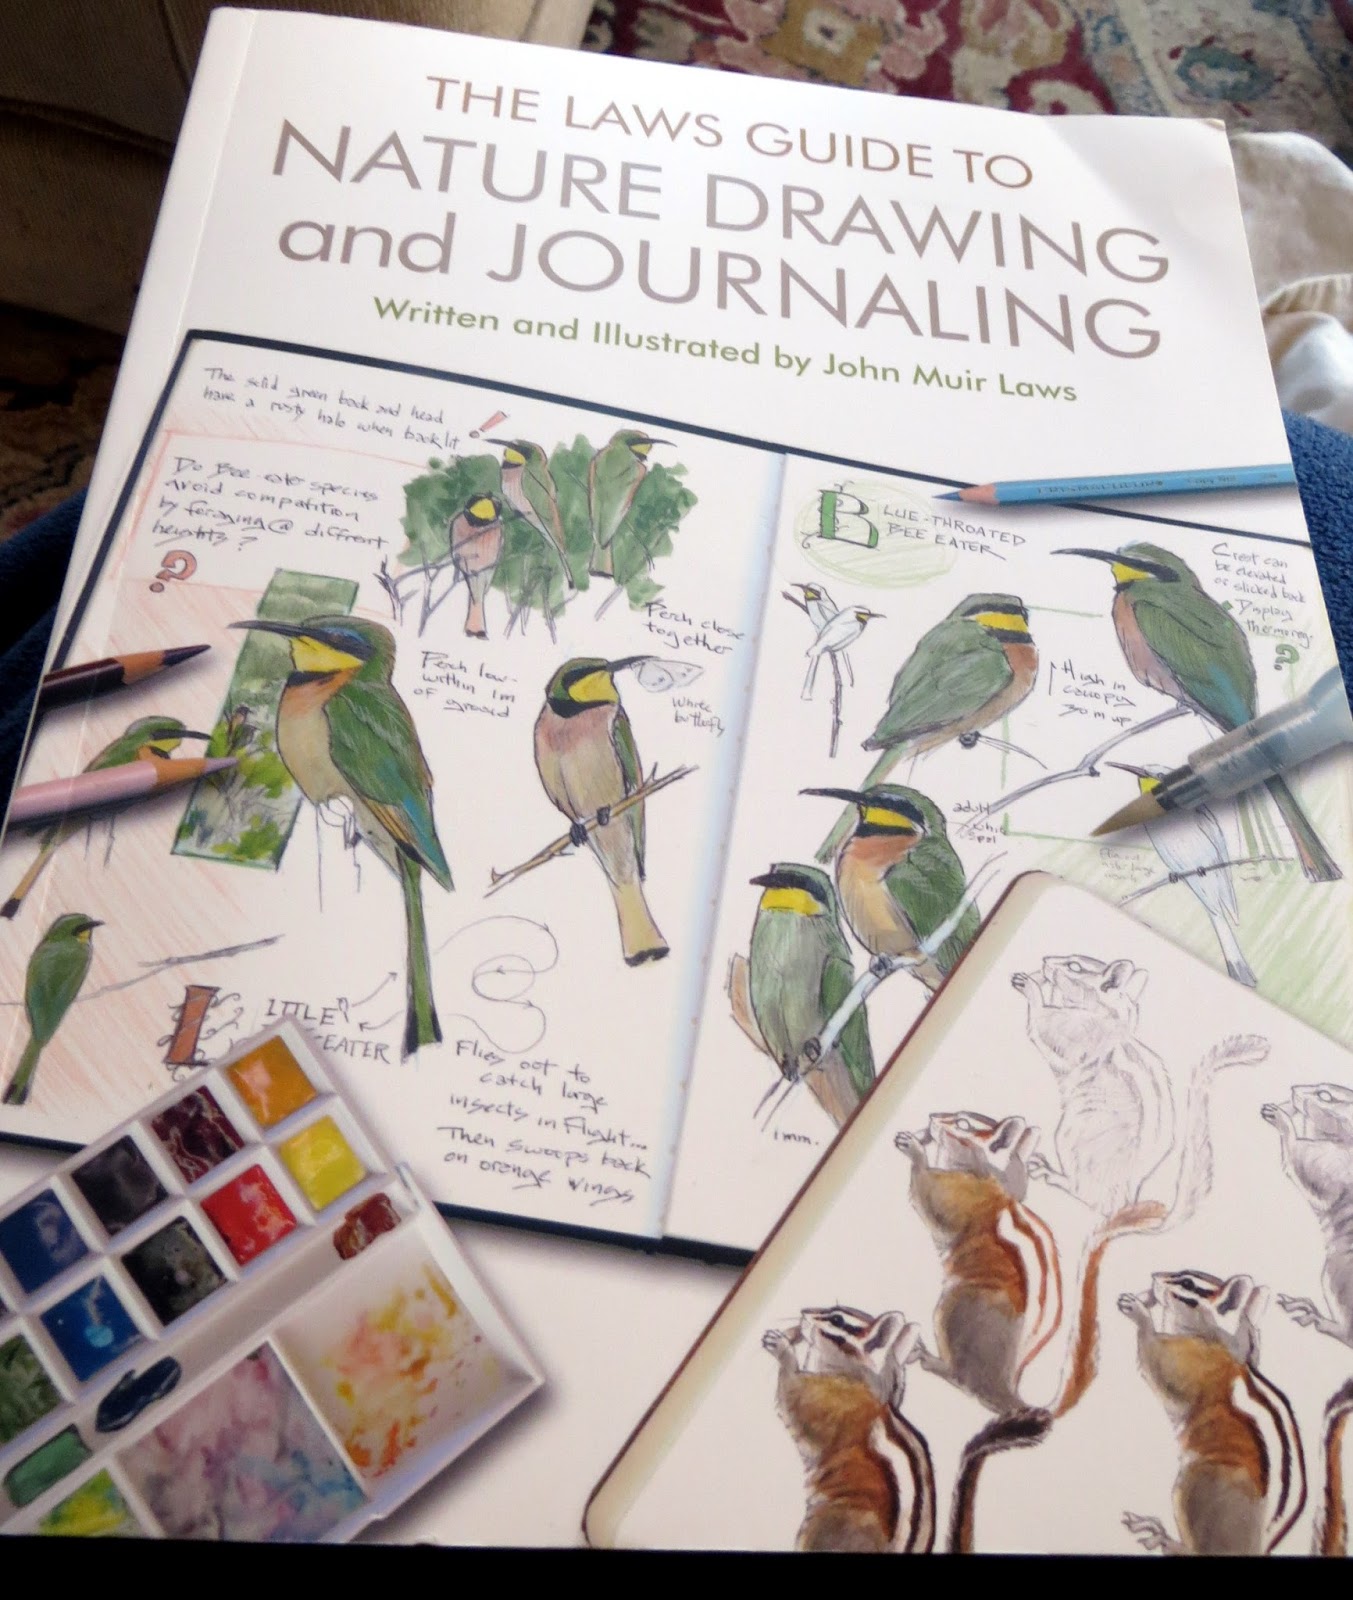 The Laws Guide to Nature Drawing and Journaling